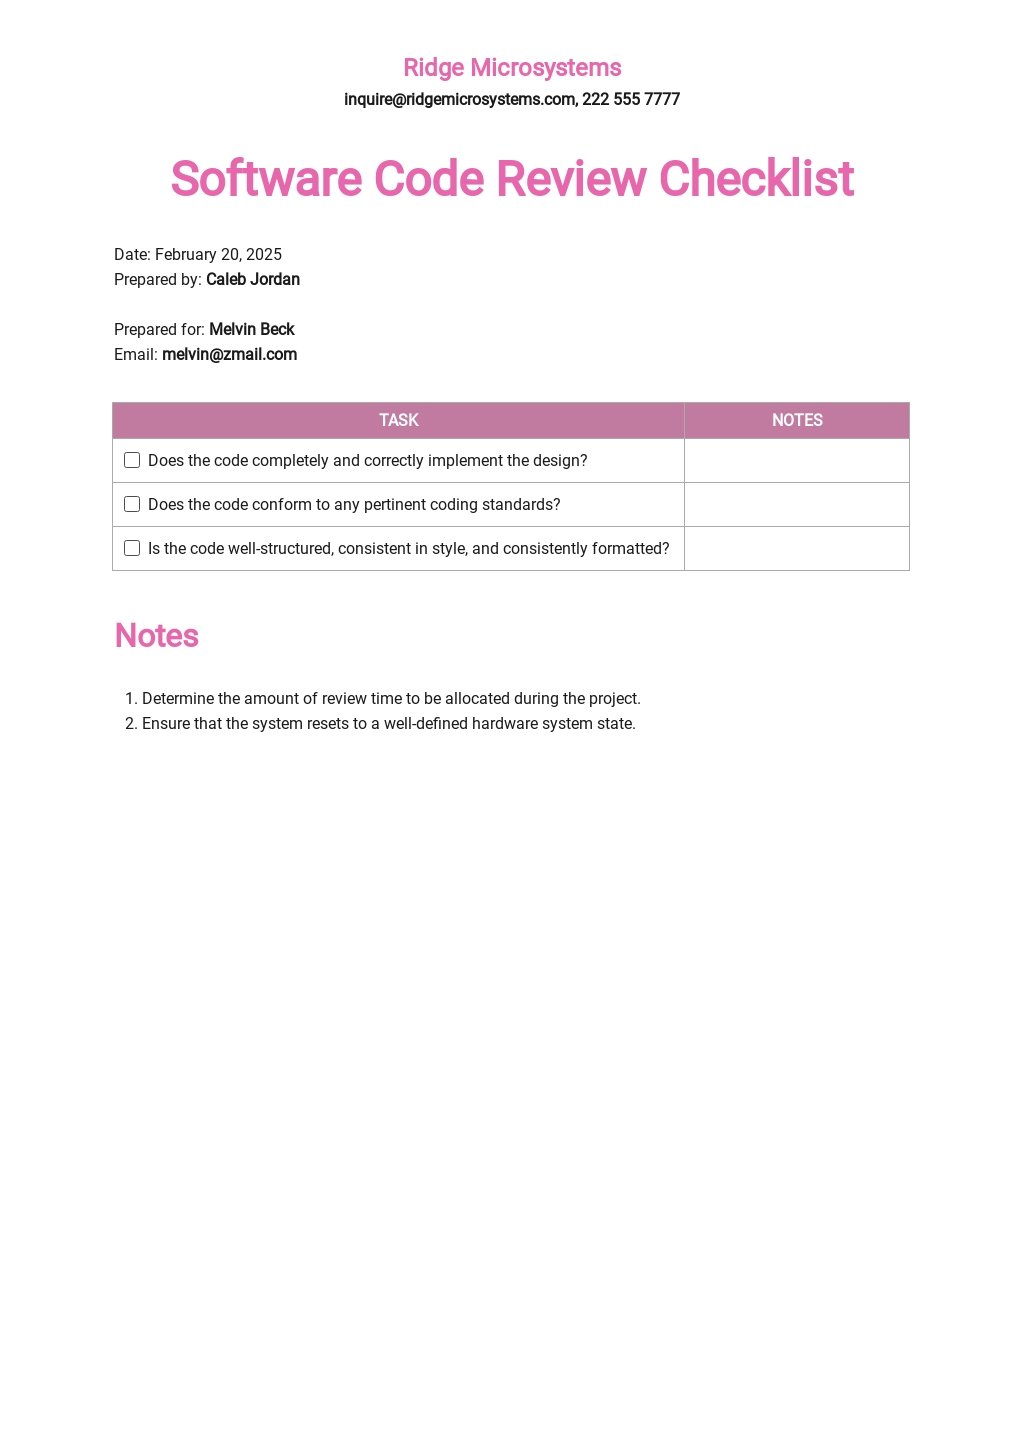 Software Code Review Checklist Template.jpe